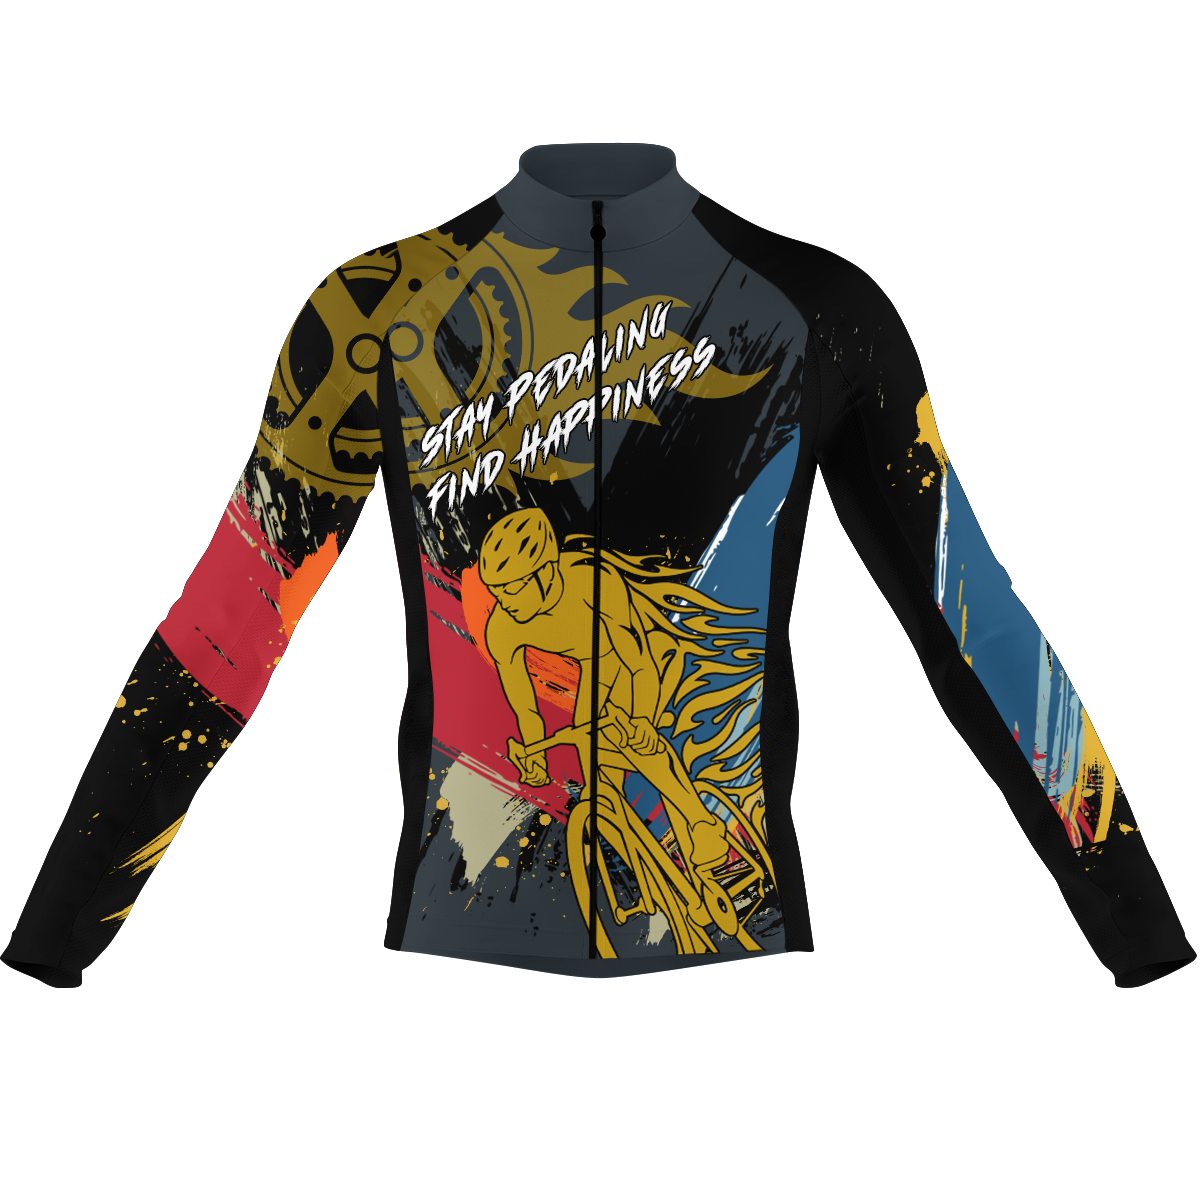 Stay pedaling find happiness sport Men Cycling Jersey Custom long sleeves road shirt | SLC03